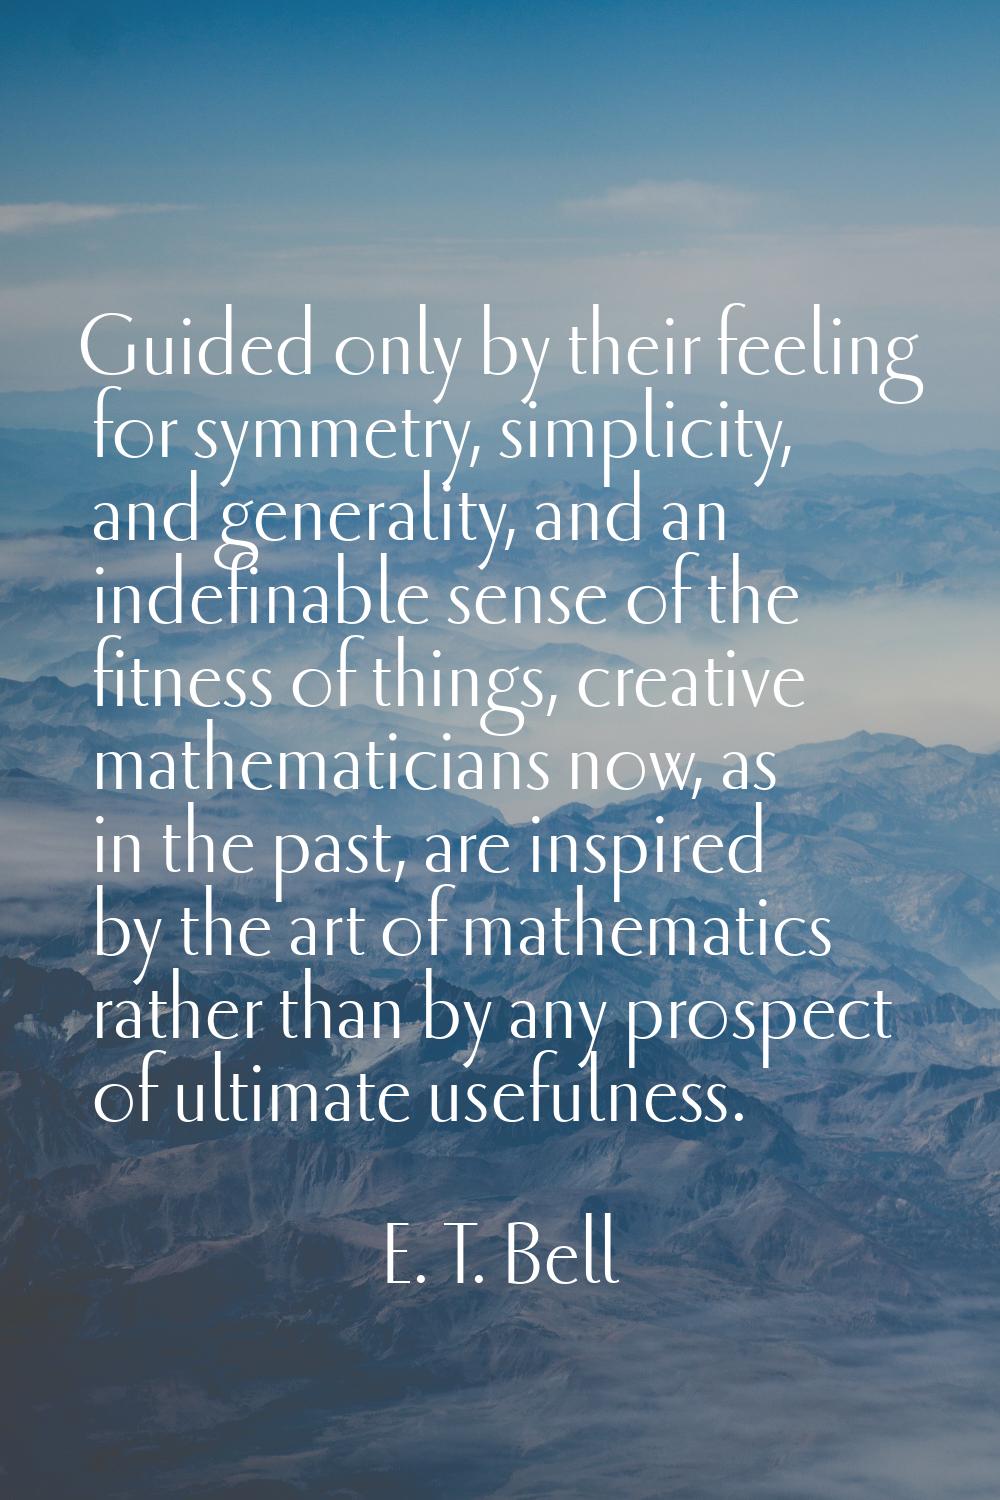 Guided only by their feeling for symmetry, simplicity, and generality, and an indefinable sense of 